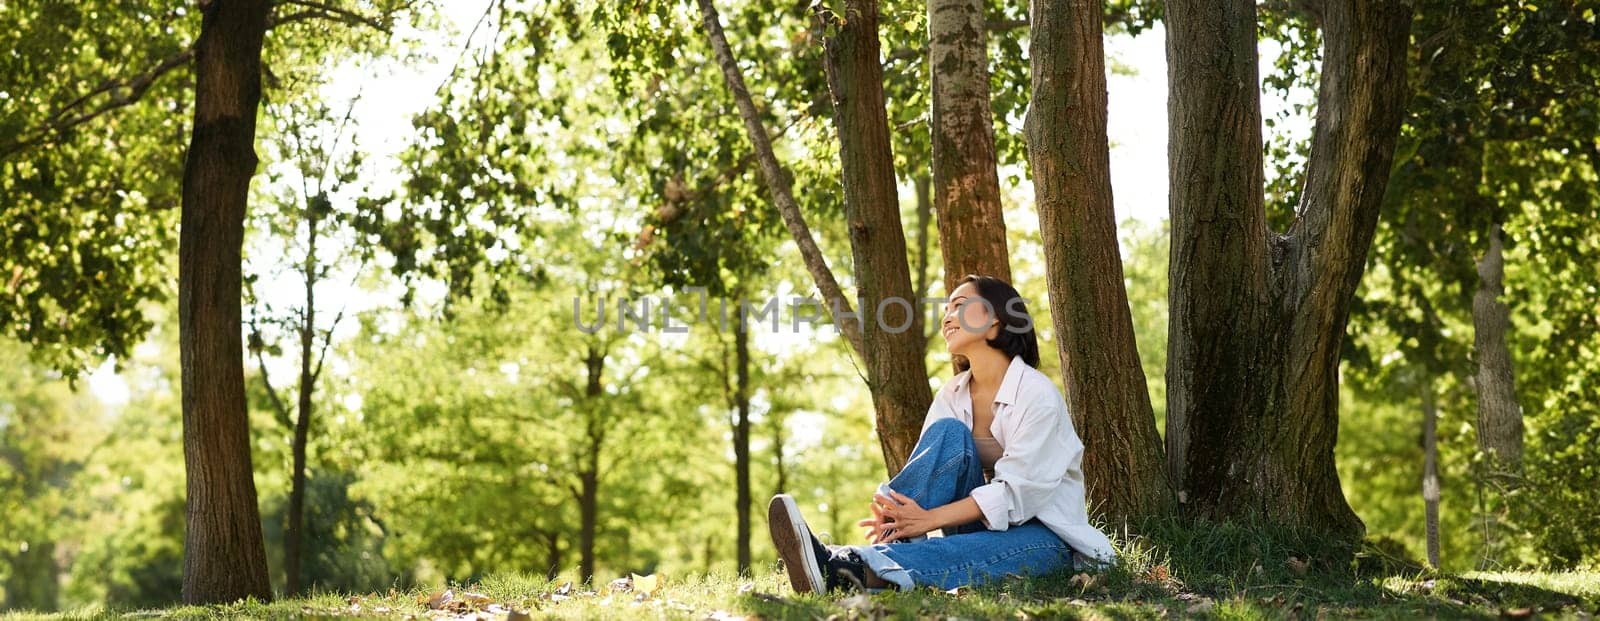 Portrait of asian girl relaxing, leaning on tree and resting in park under shade, smiling and enjoying the walk outdoors.